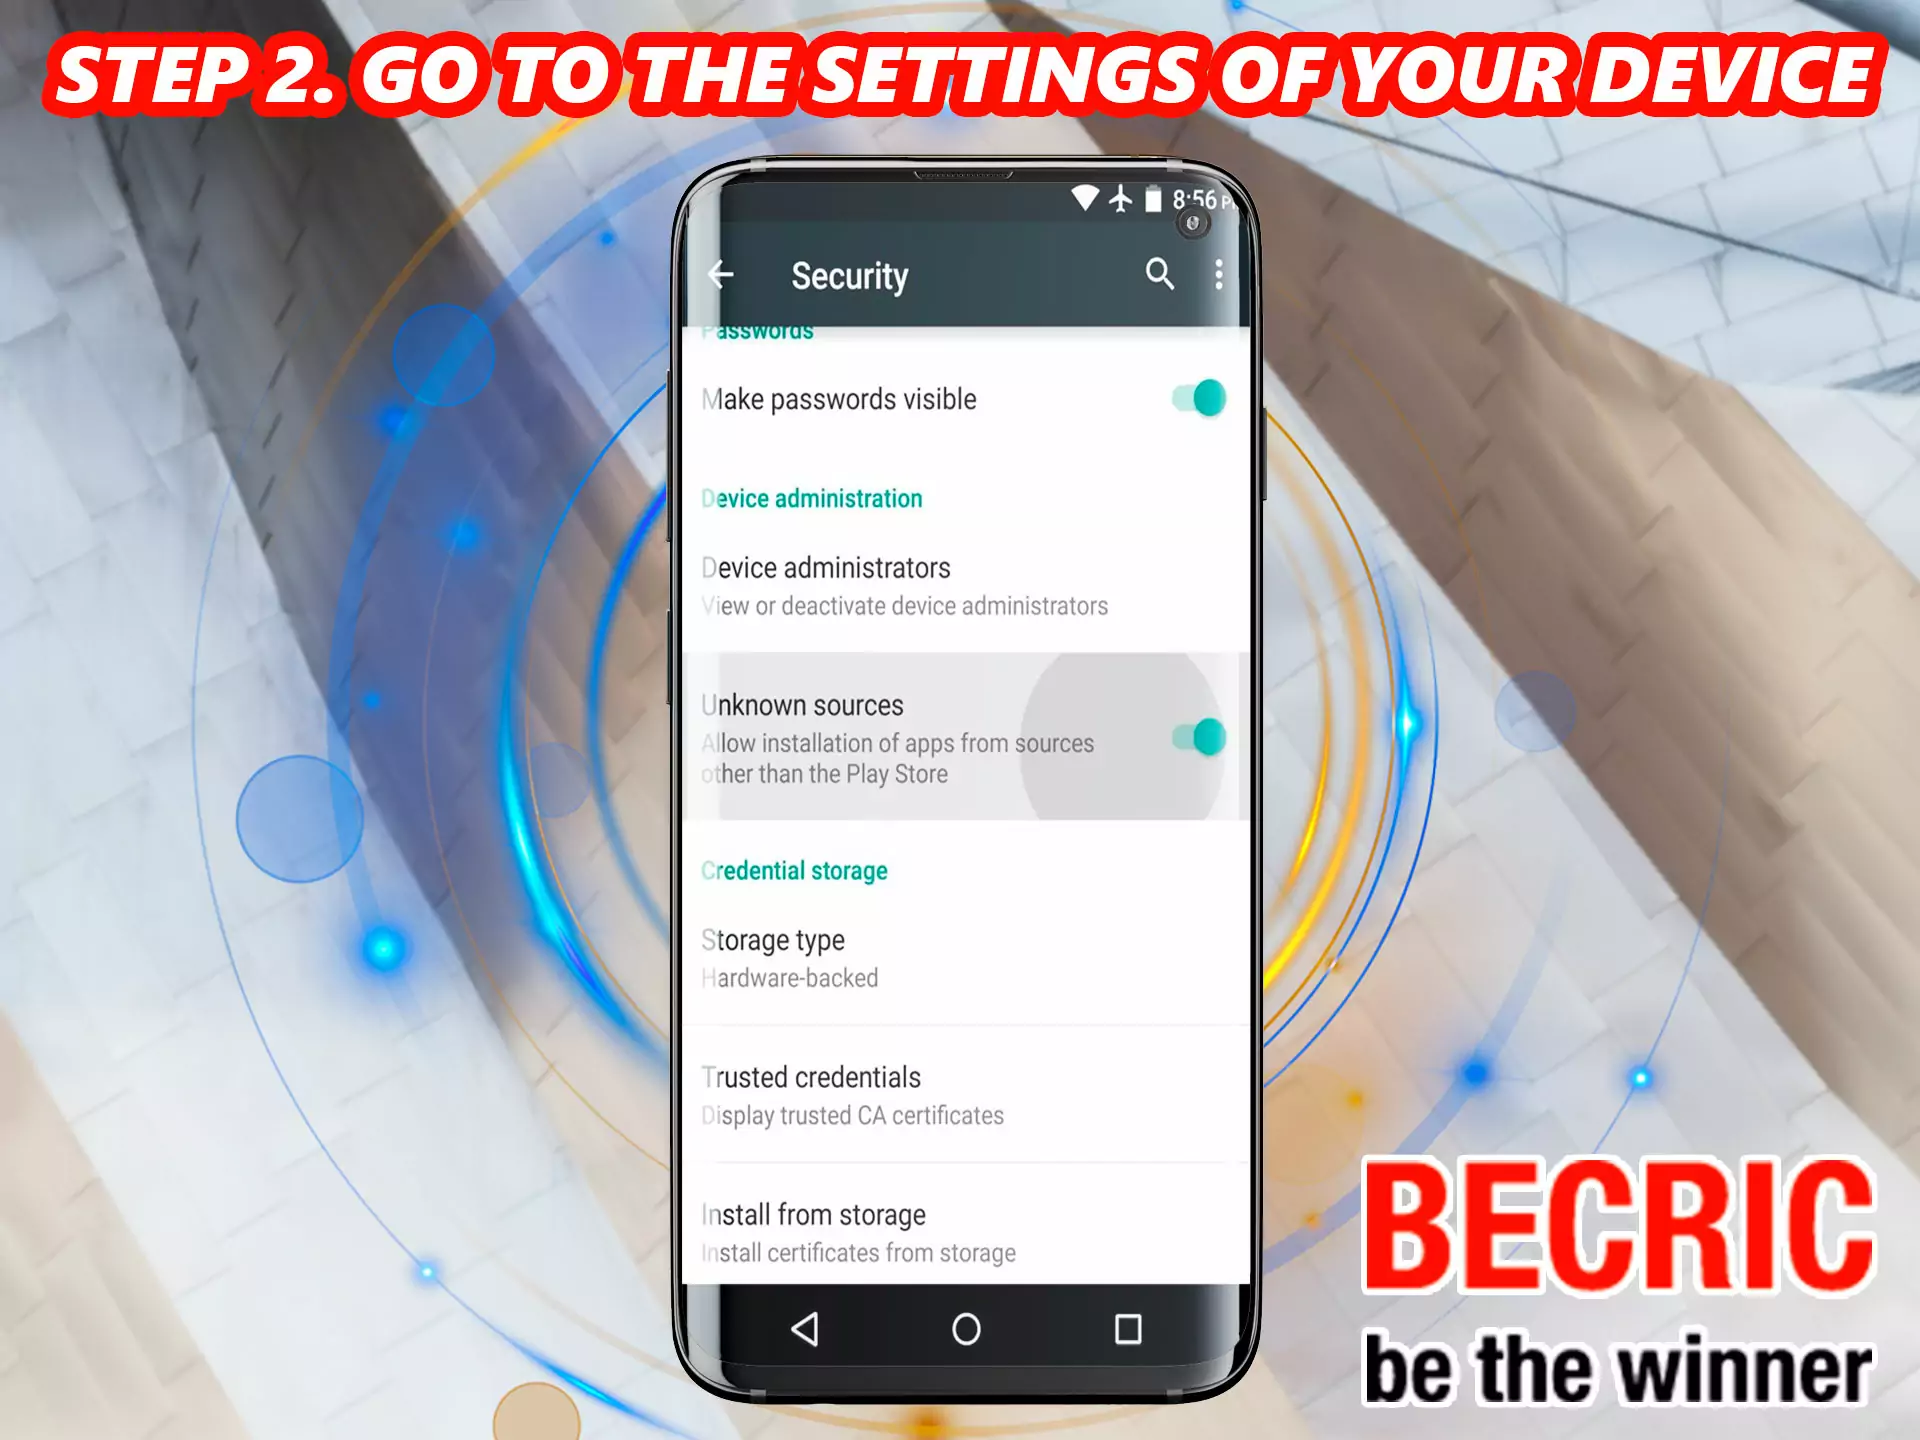 In the Android operating system, you need to perform simple manipulations in the settings to allow the installation of the bookmaker application.